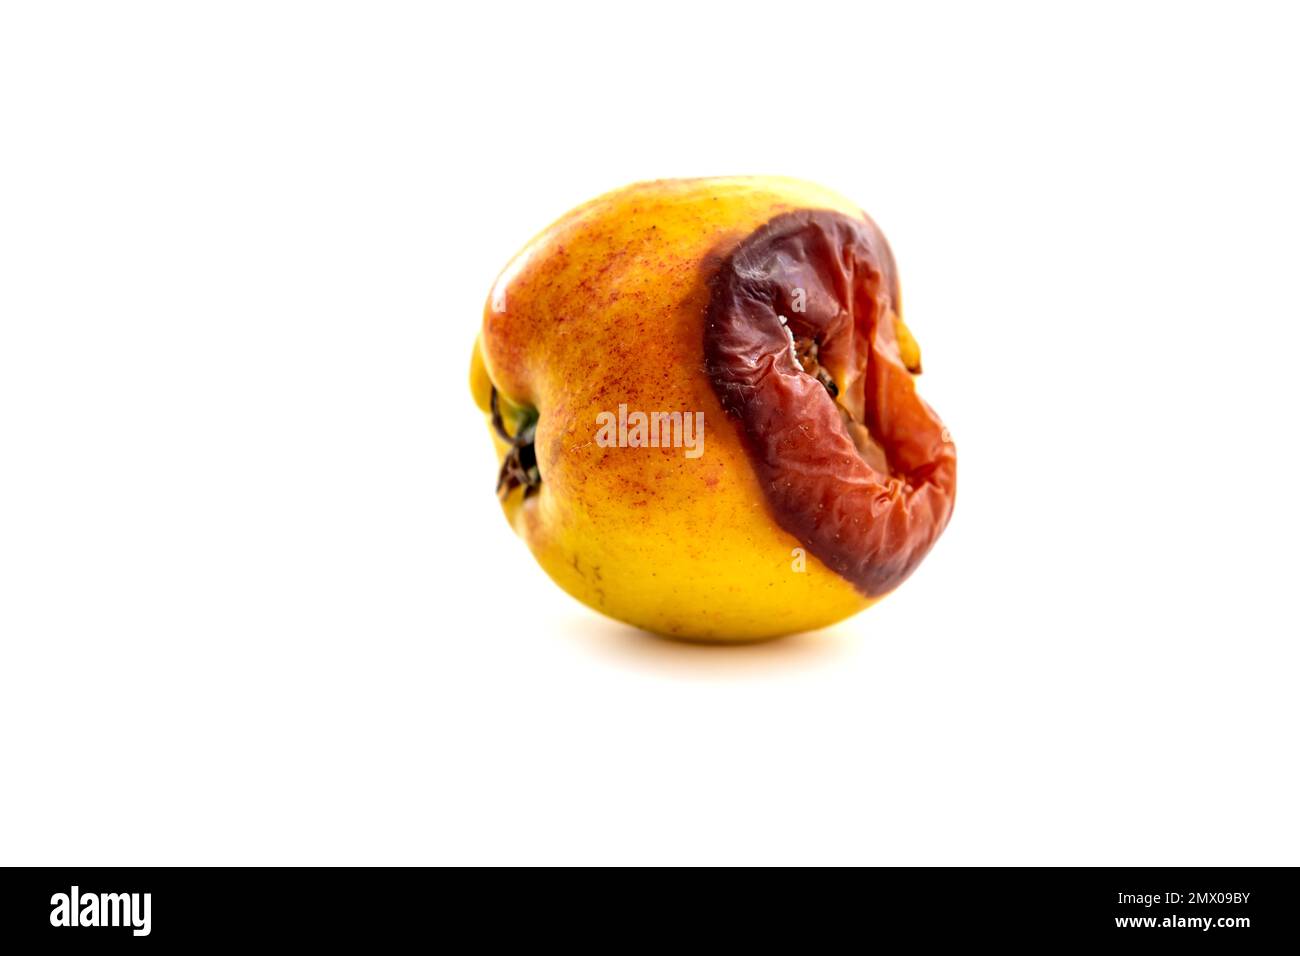 A rotten apple isolated in white background. Rotten apple concept. Decay in nature. Stock Photo